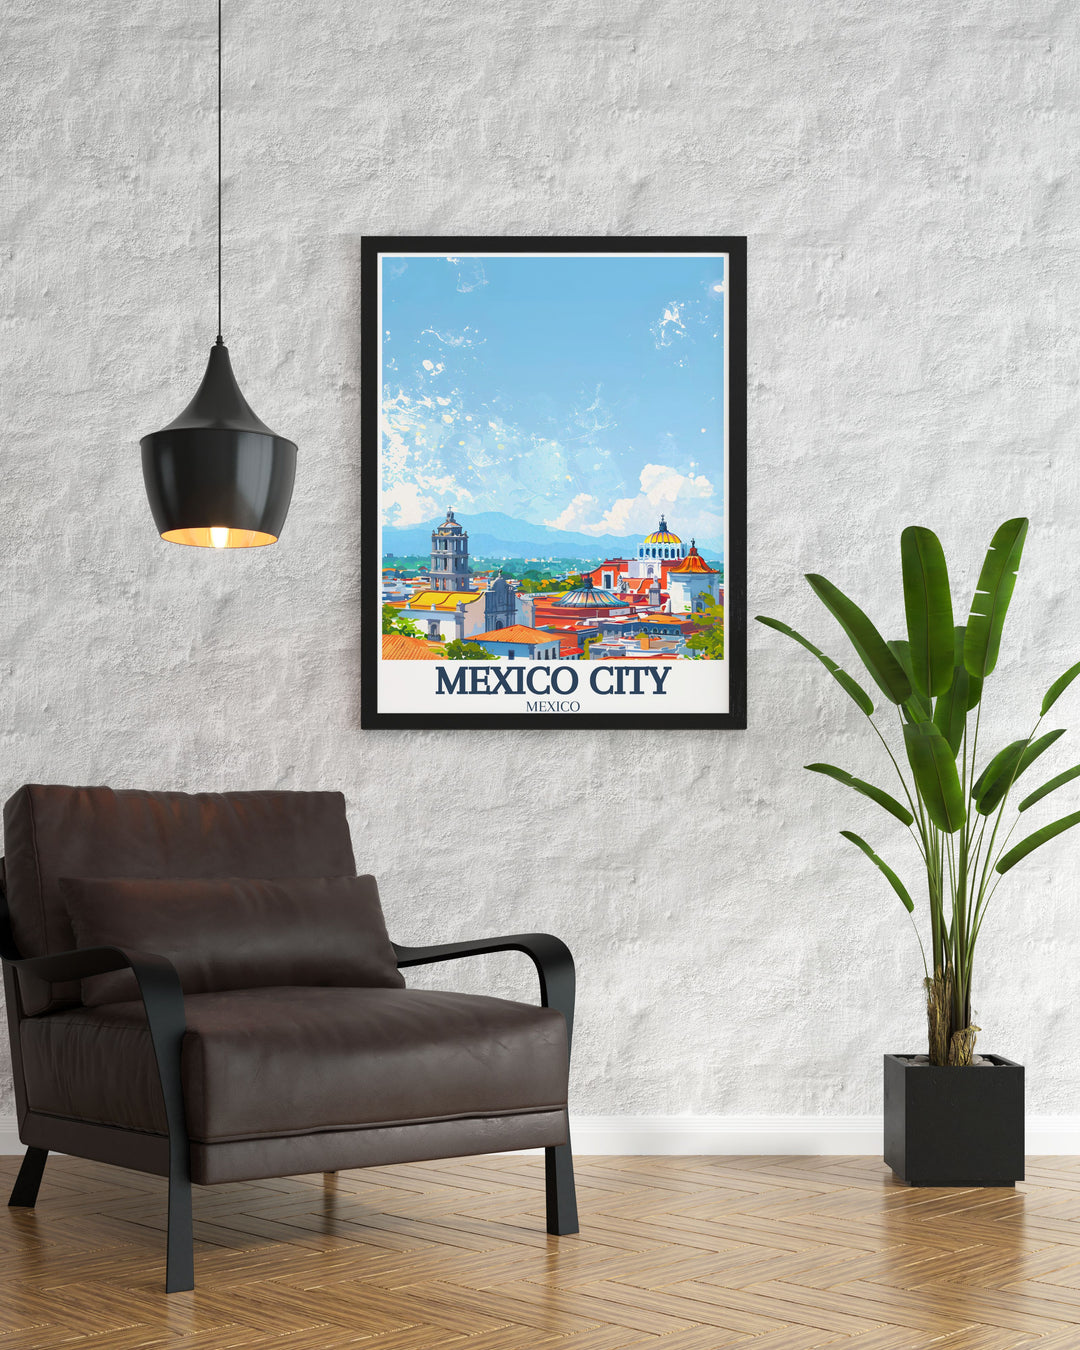 Metropolitan cathedral Zocalo Chapultepec castle artwork captures the essence of Mexico Citys iconic landmarks. This print is ideal for adding a touch of Mexican heritage and culture to your living space or office.